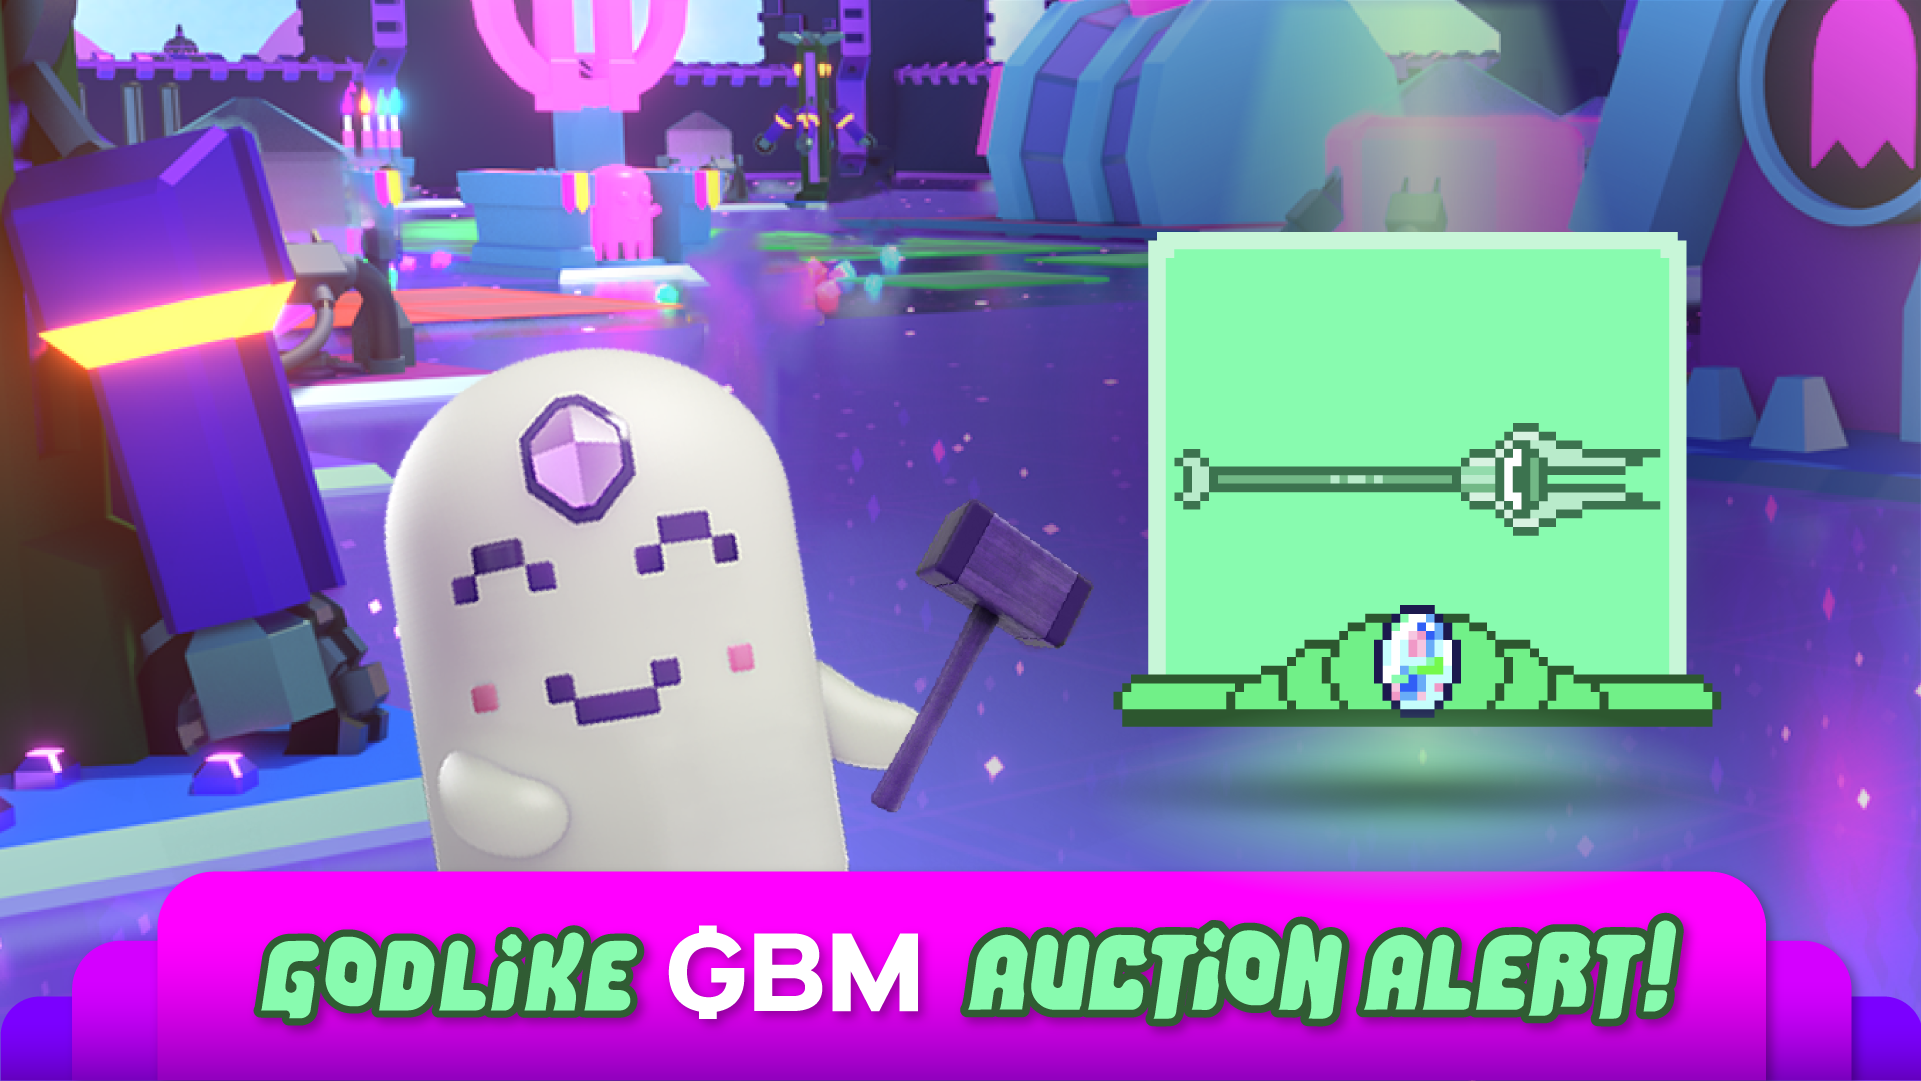 3 New Features Now Live in the Aavegotchi Auction House